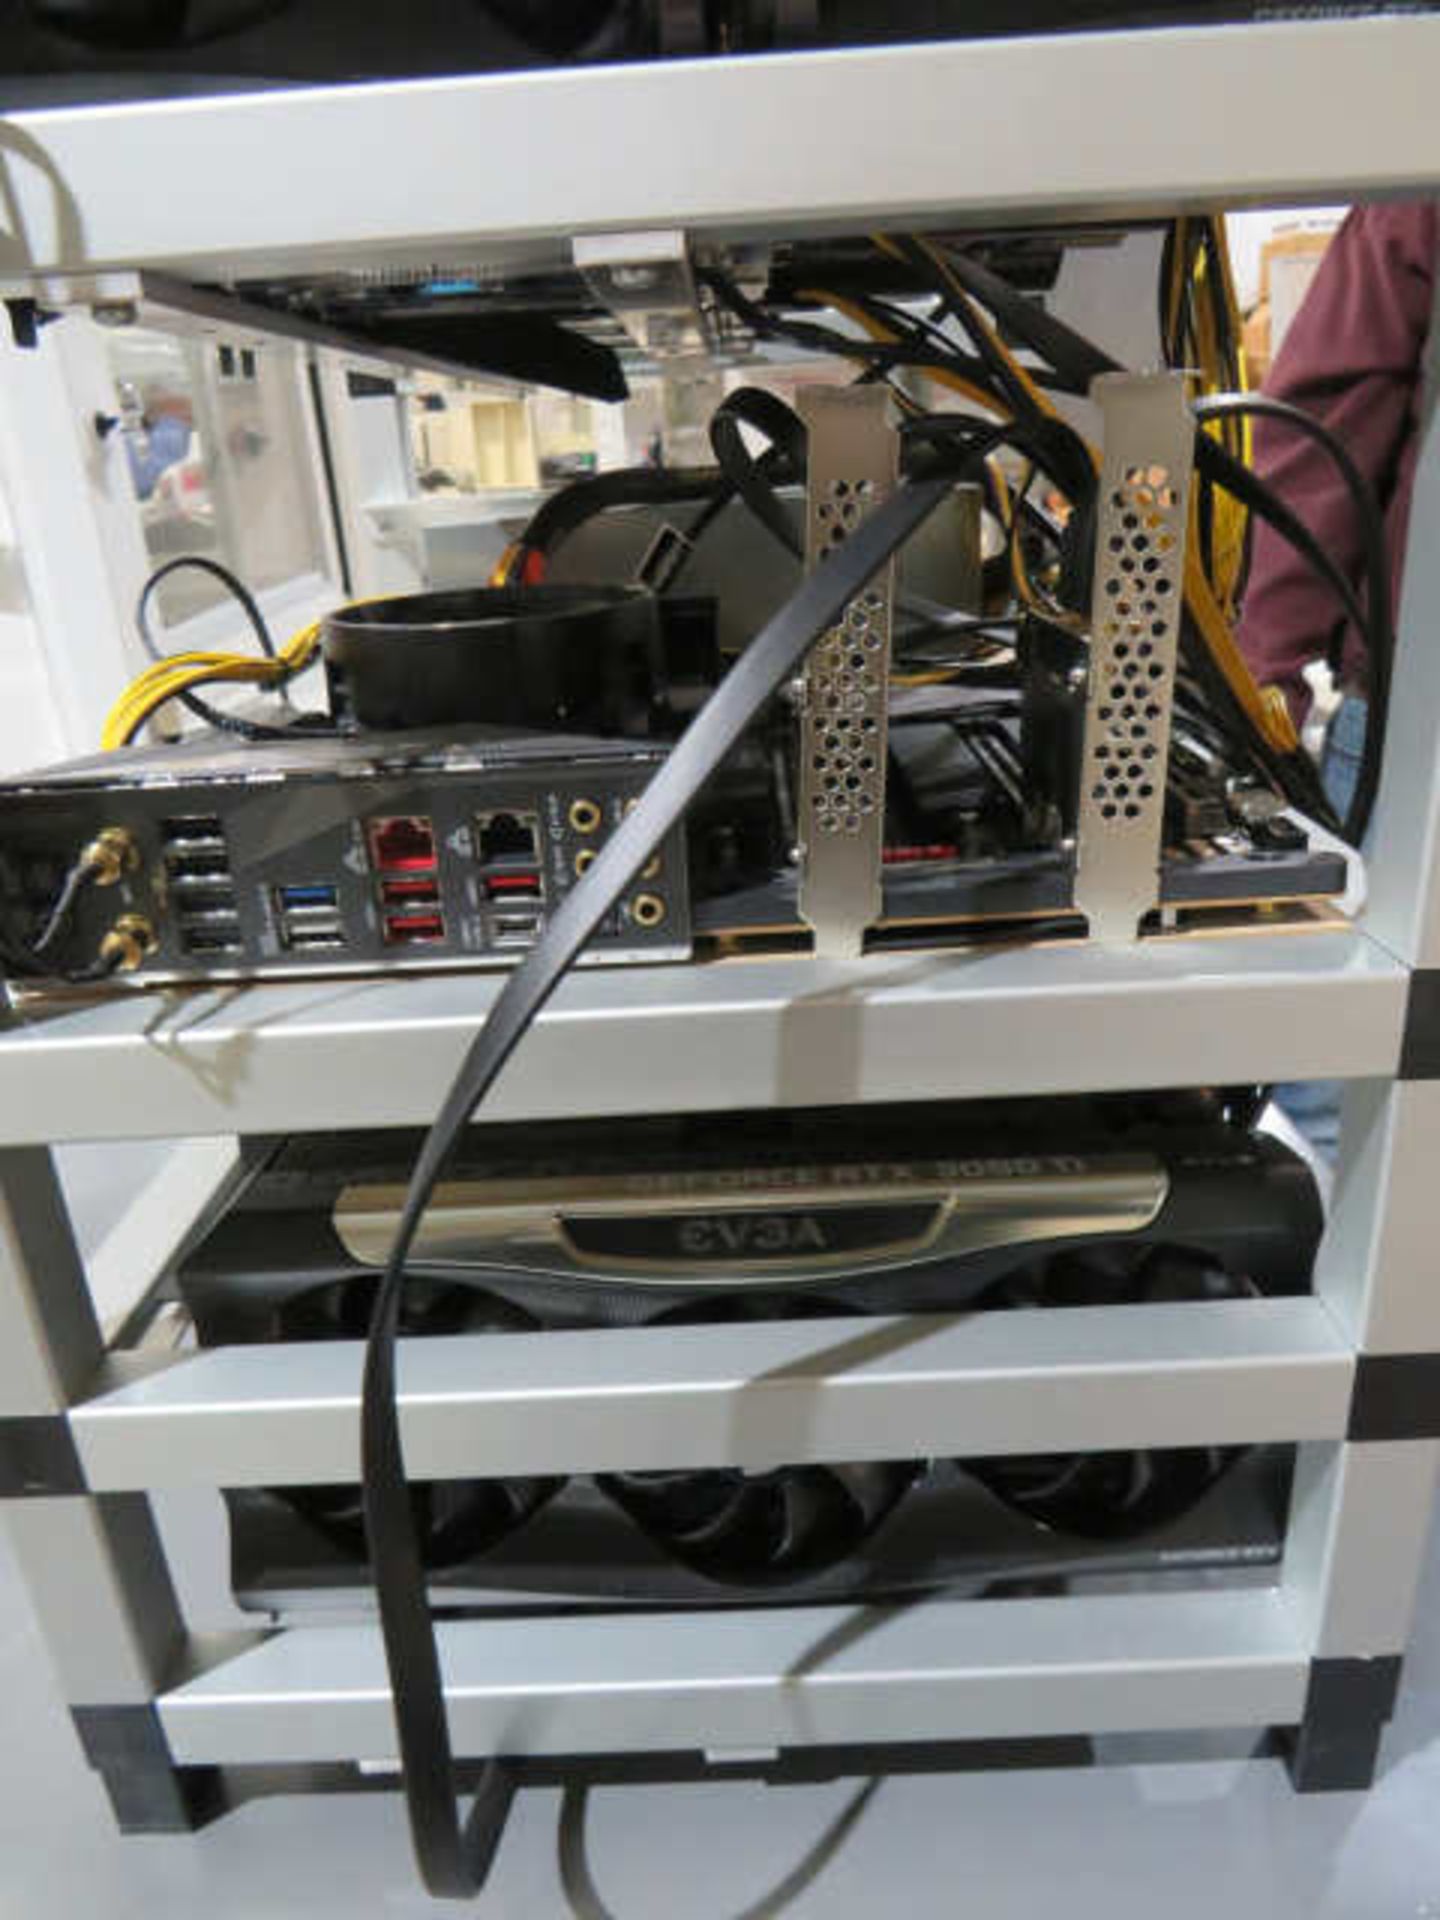 crypto mining rig with 6 Geeforce rtx 3090 graphics cards comes - Image 2 of 10